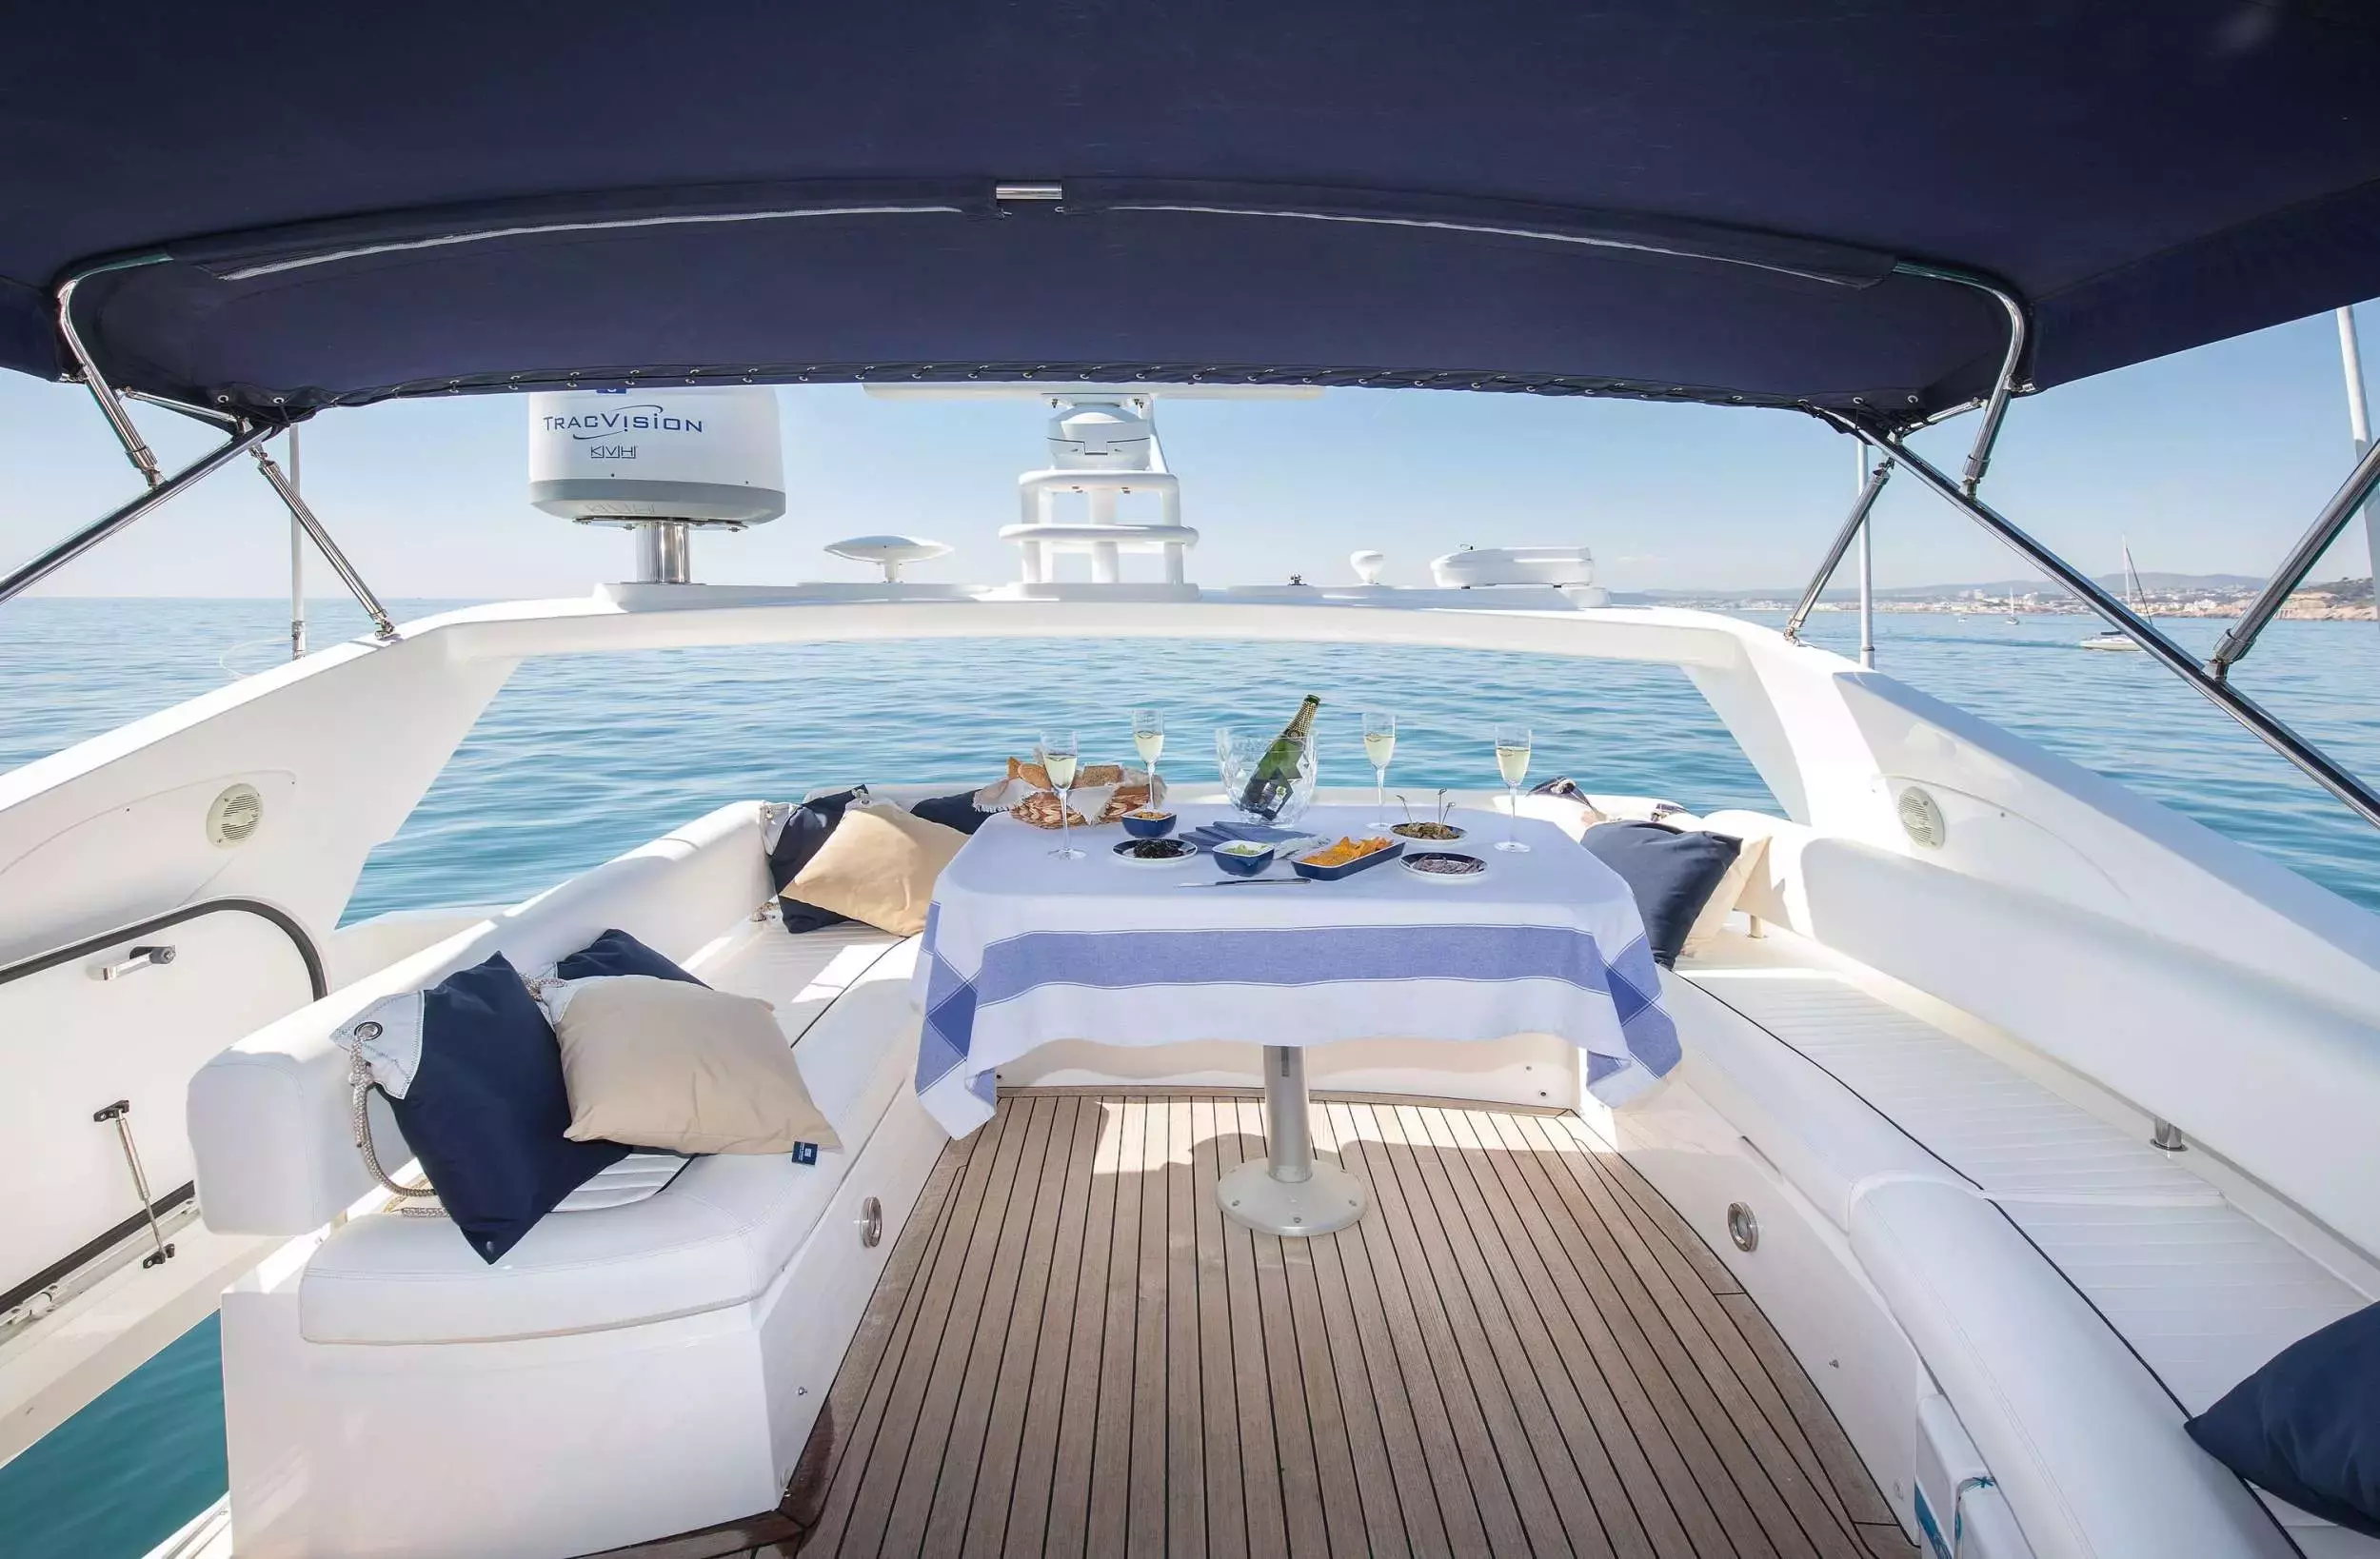 Mediterrani IV by Sunseeker - Top rates for a Charter of a private Motor Yacht in Spain